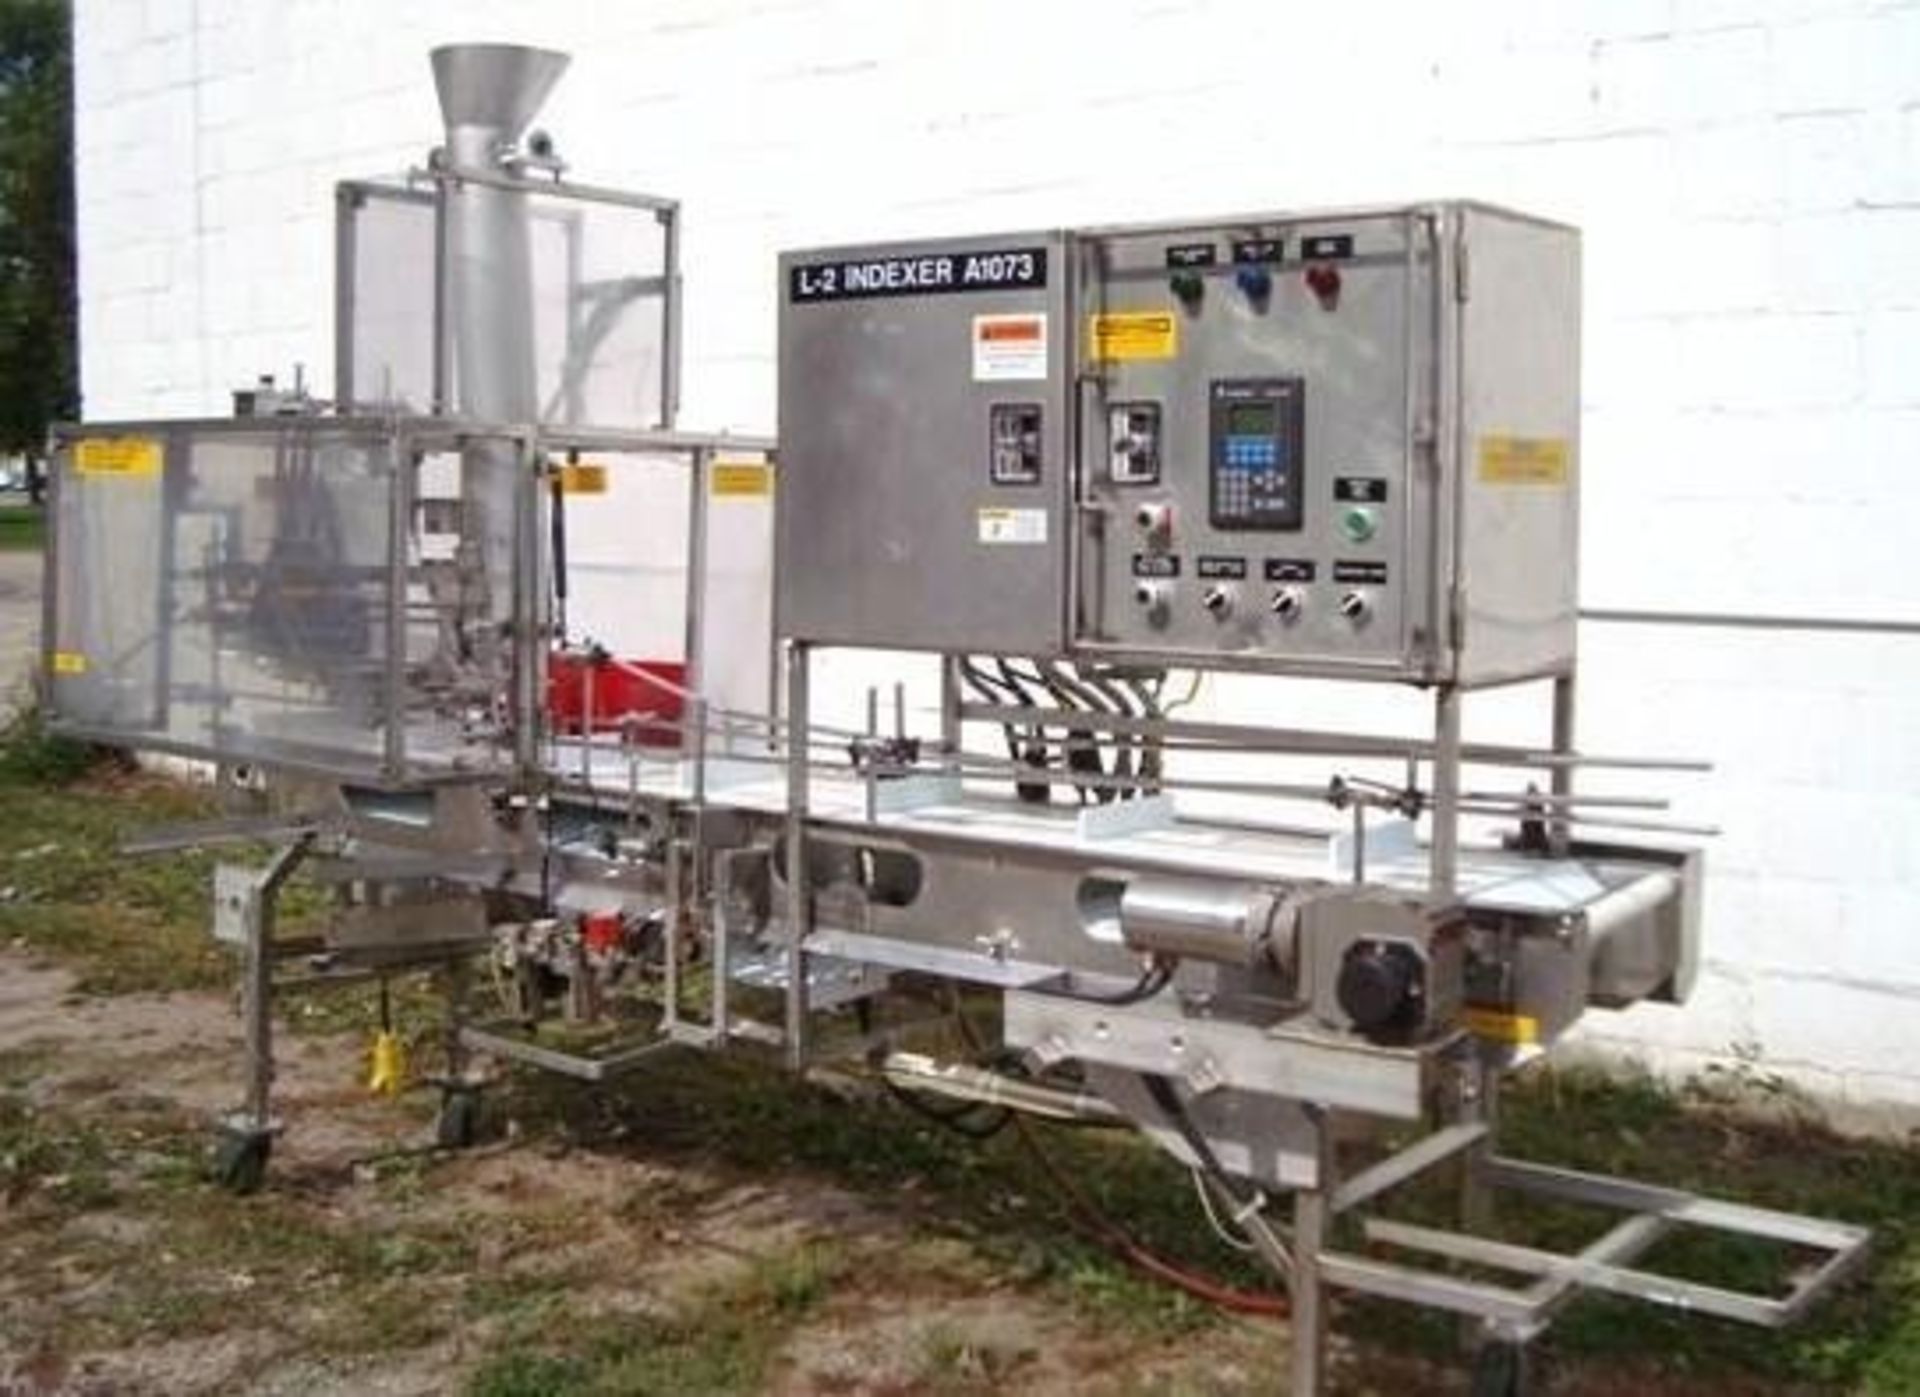 Food Process Systems S/S Sanitary Box Filler, Model 6000, S/N 145702 with Allen Bradley Ultra 3000 - Image 12 of 12